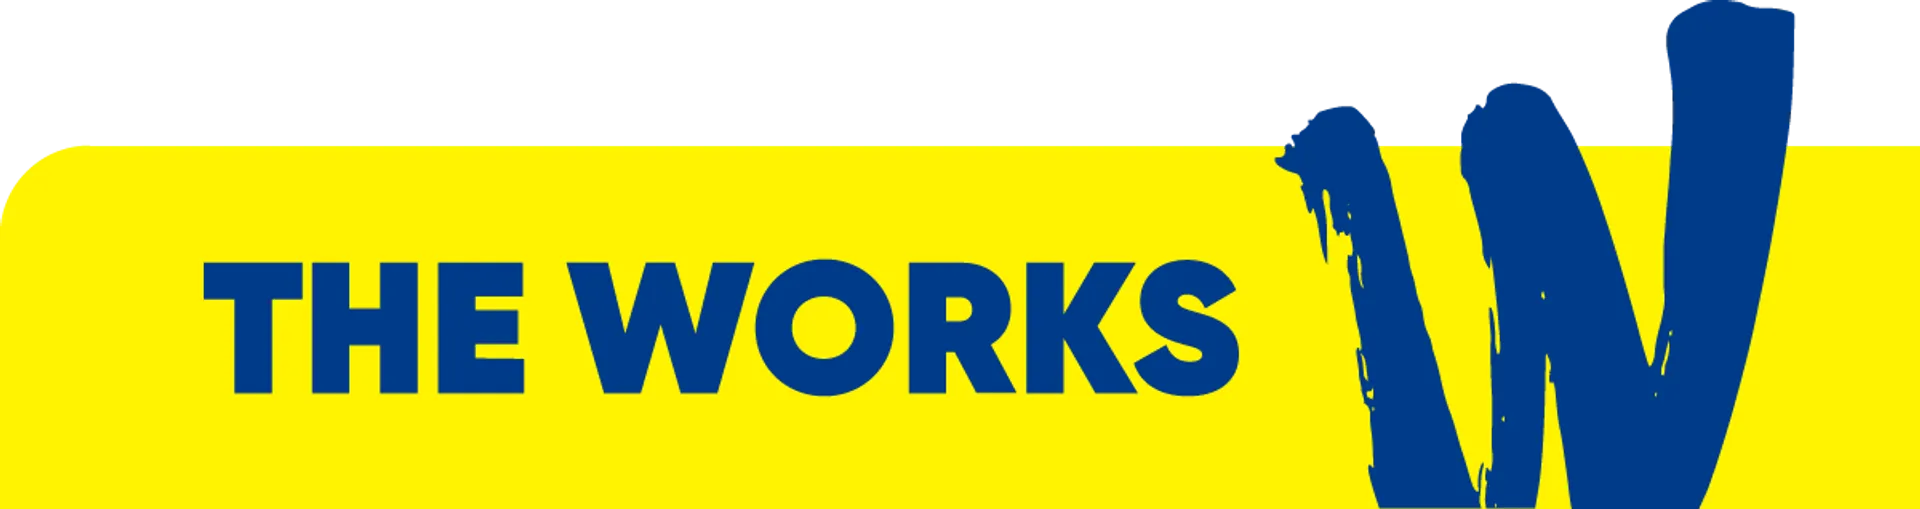 THE WORKS logo